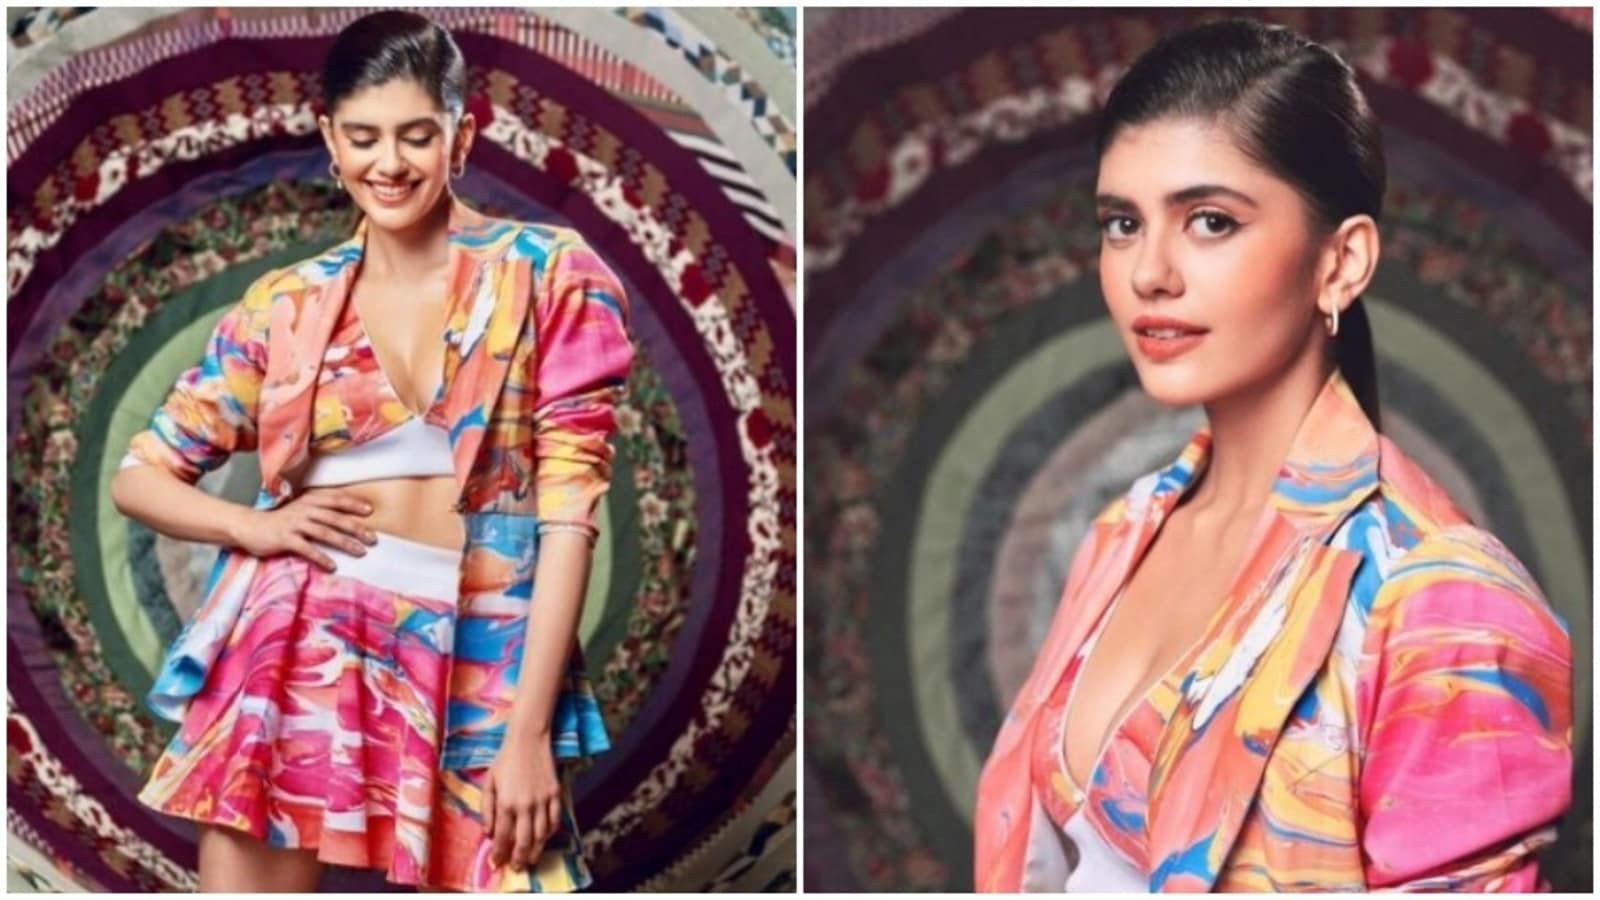 Sanjana Sanghi, in a rainbow co-ord set, is stealing the show